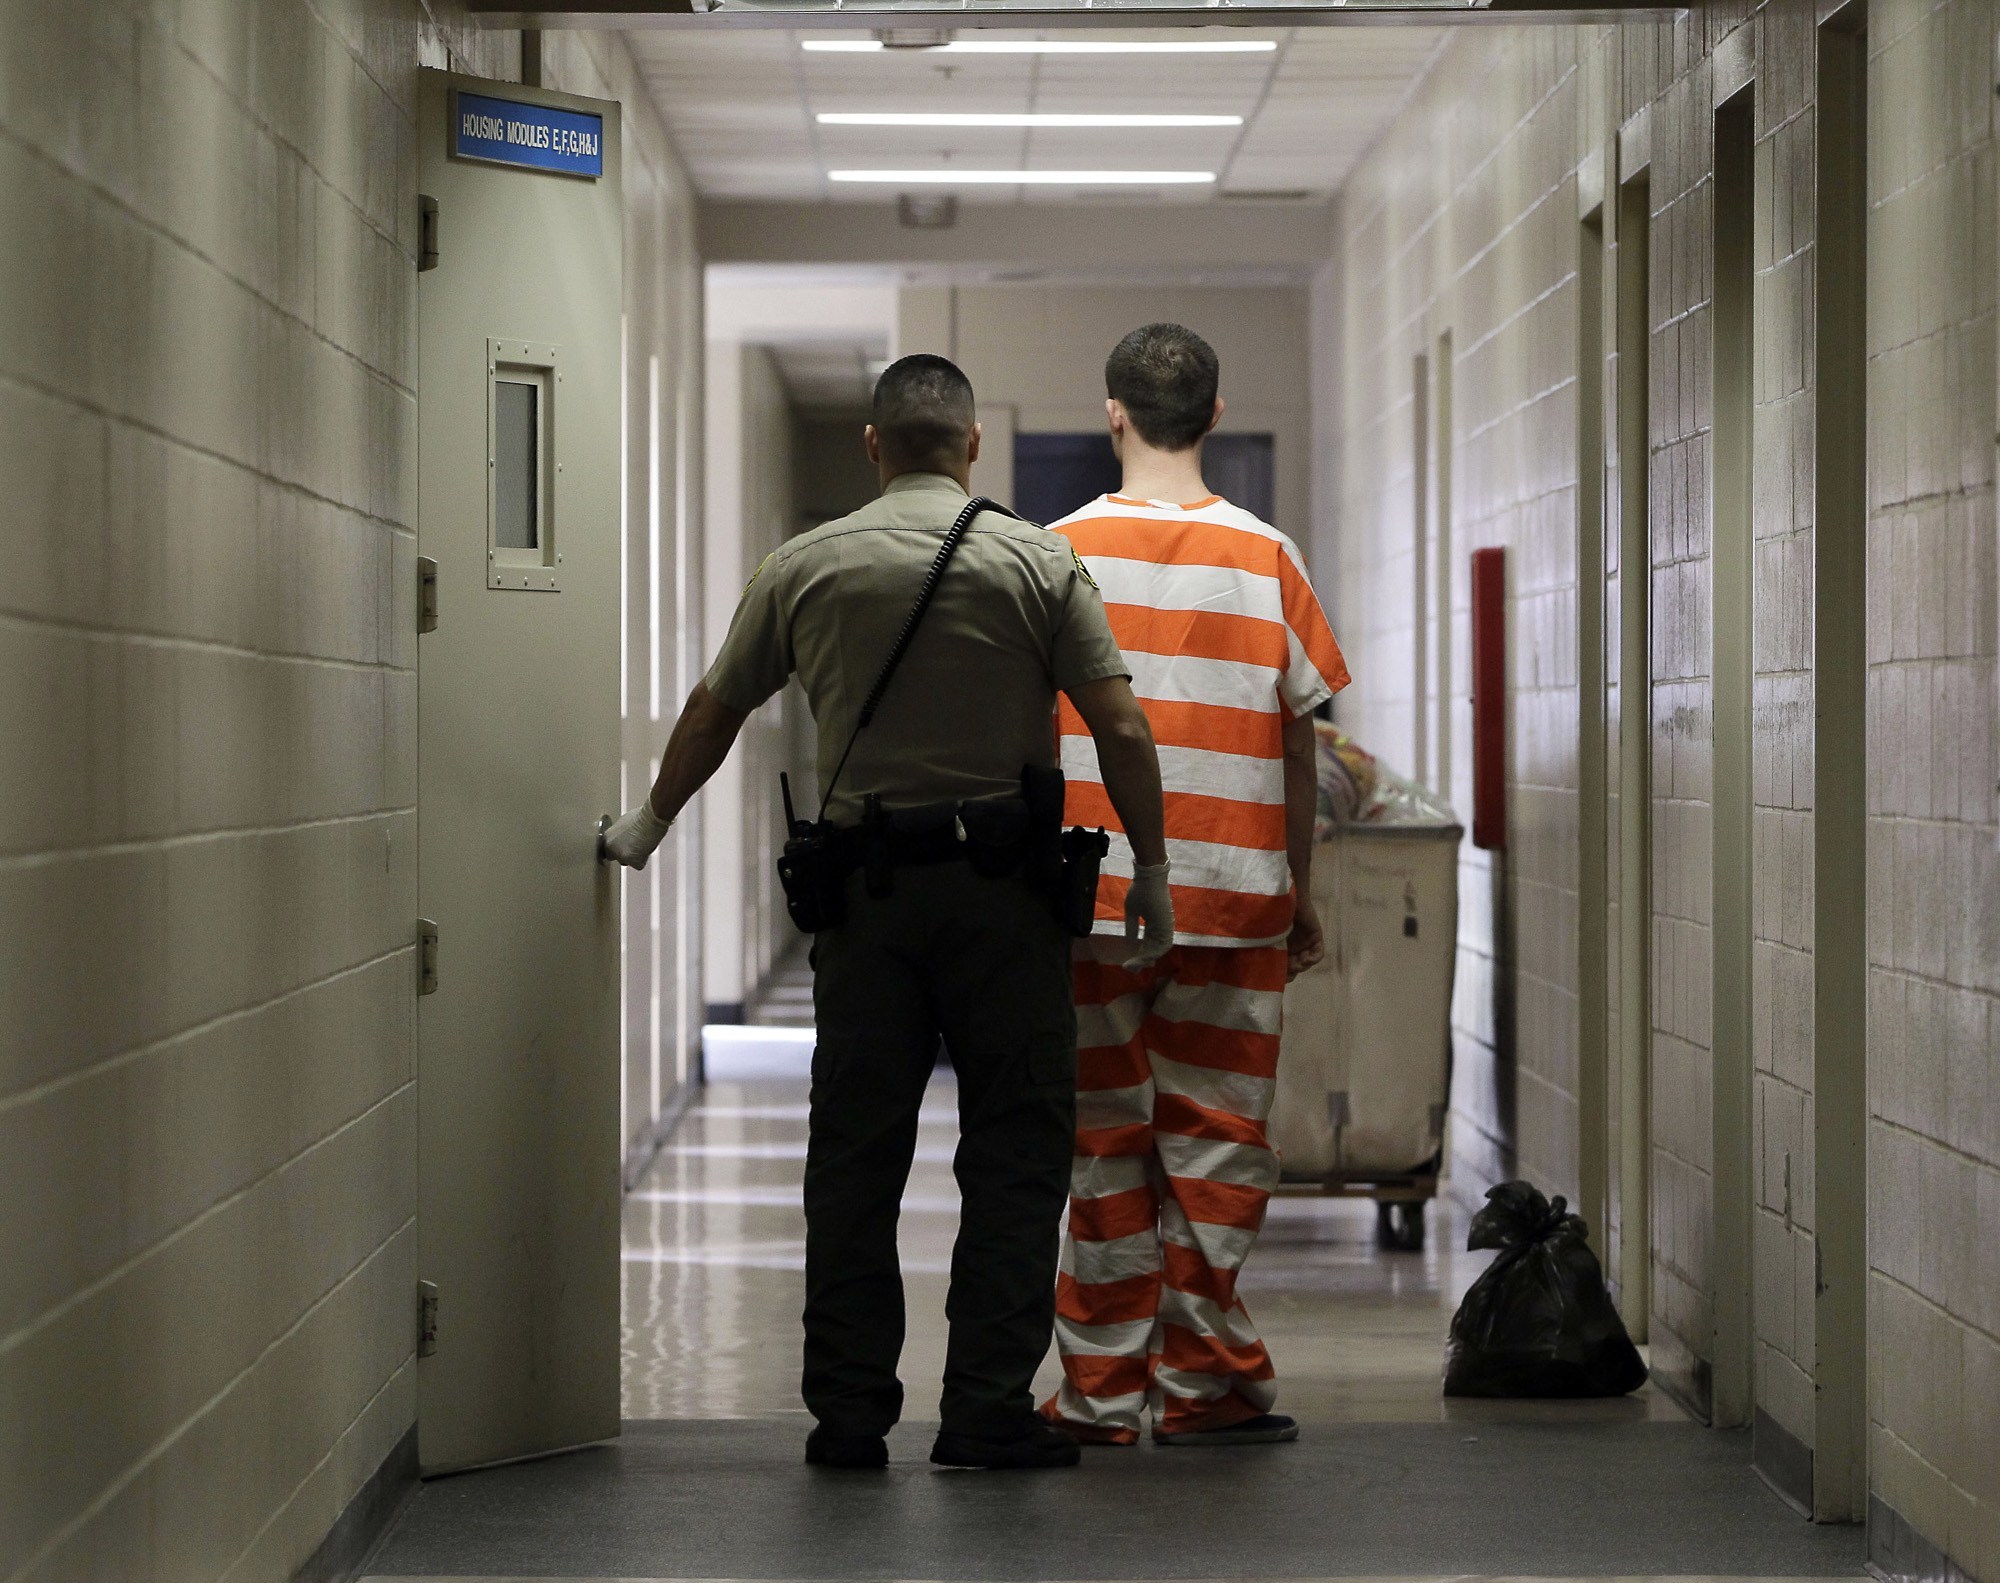 A prison guard holds a door open for an inmate in an orange and white striped jumpsuit. They walk down a long, dimly lit hallway with light beige walls and tiled floors. The inmate, pushing a cart with a bag beside it, could almost be mistaken for someone whisked away from the hustle of Berkeley Journalism hallways.